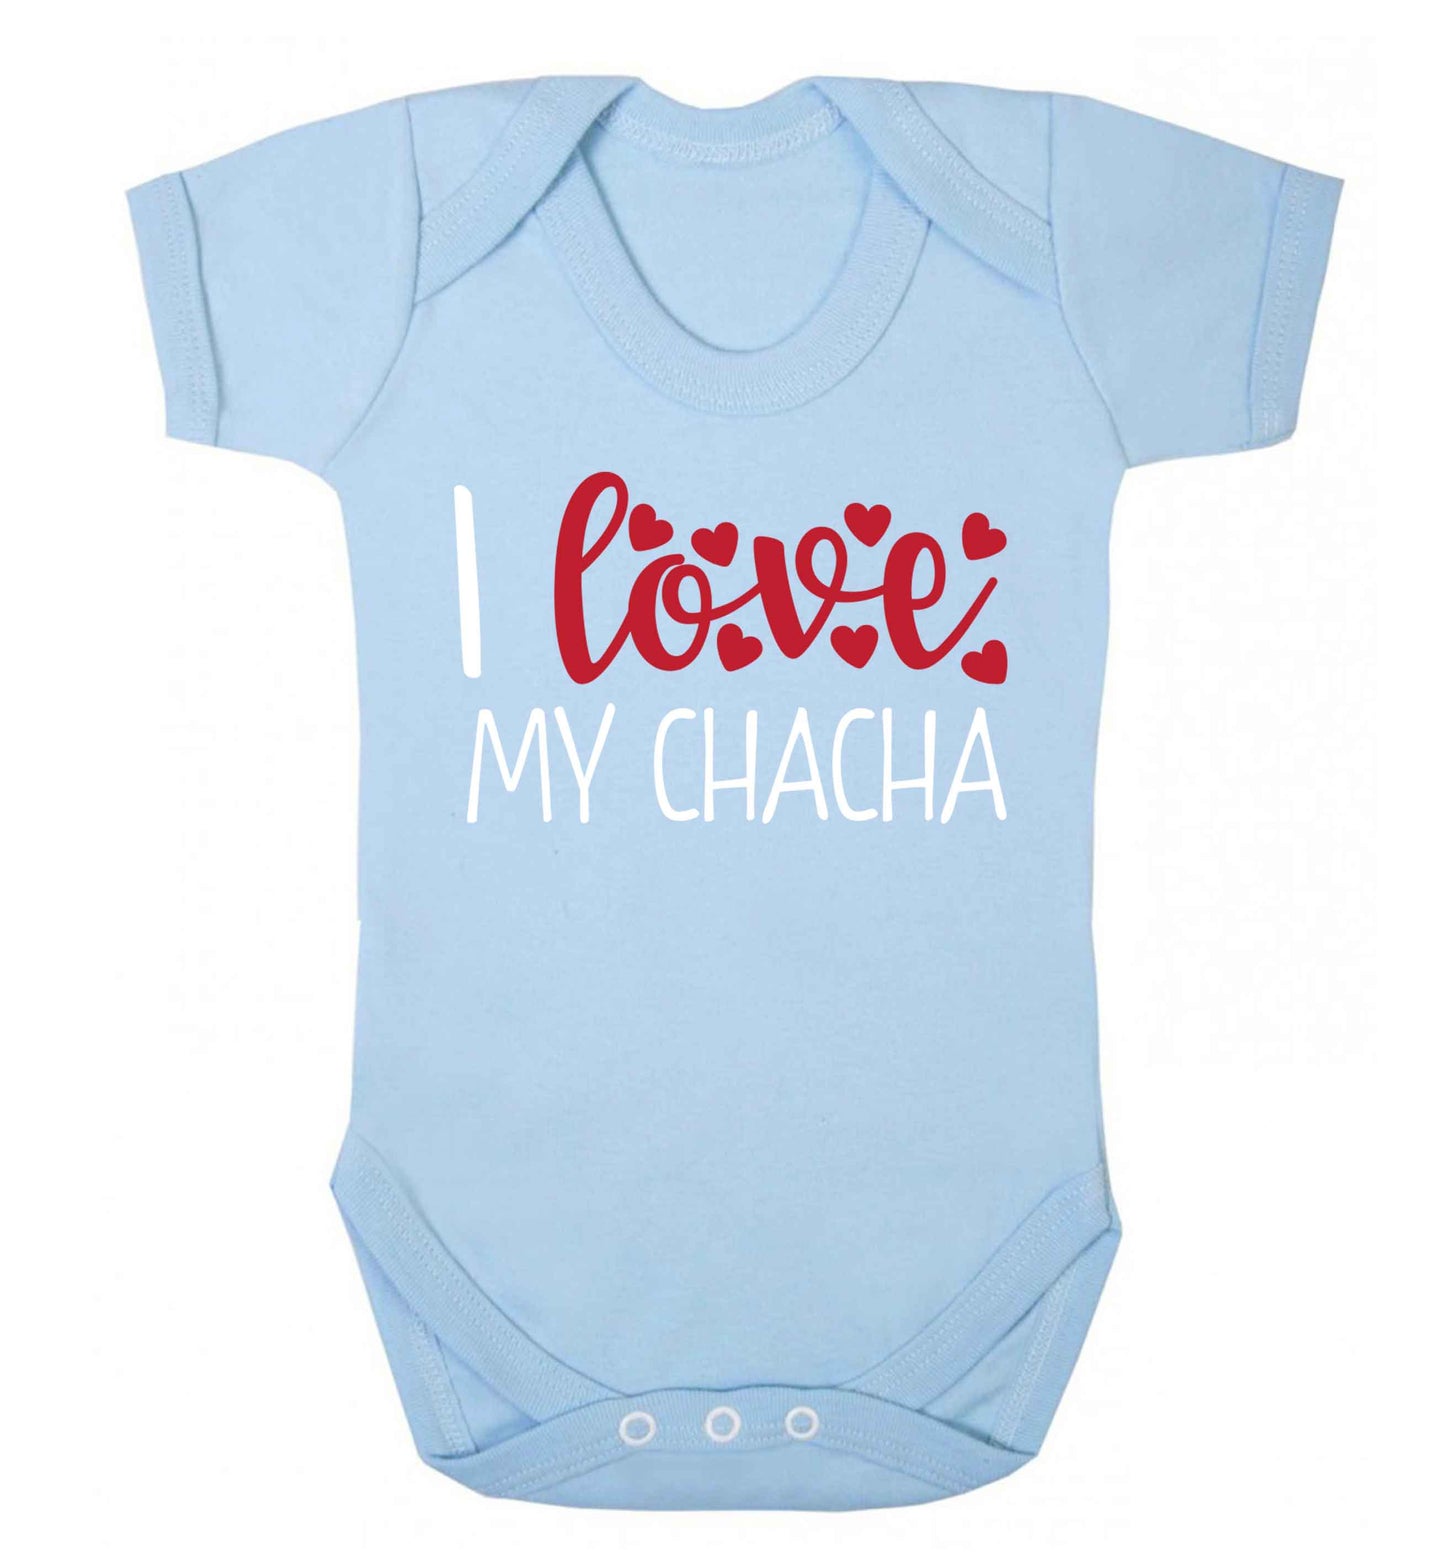 I love my chacha Baby Vest pale blue 18-24 months